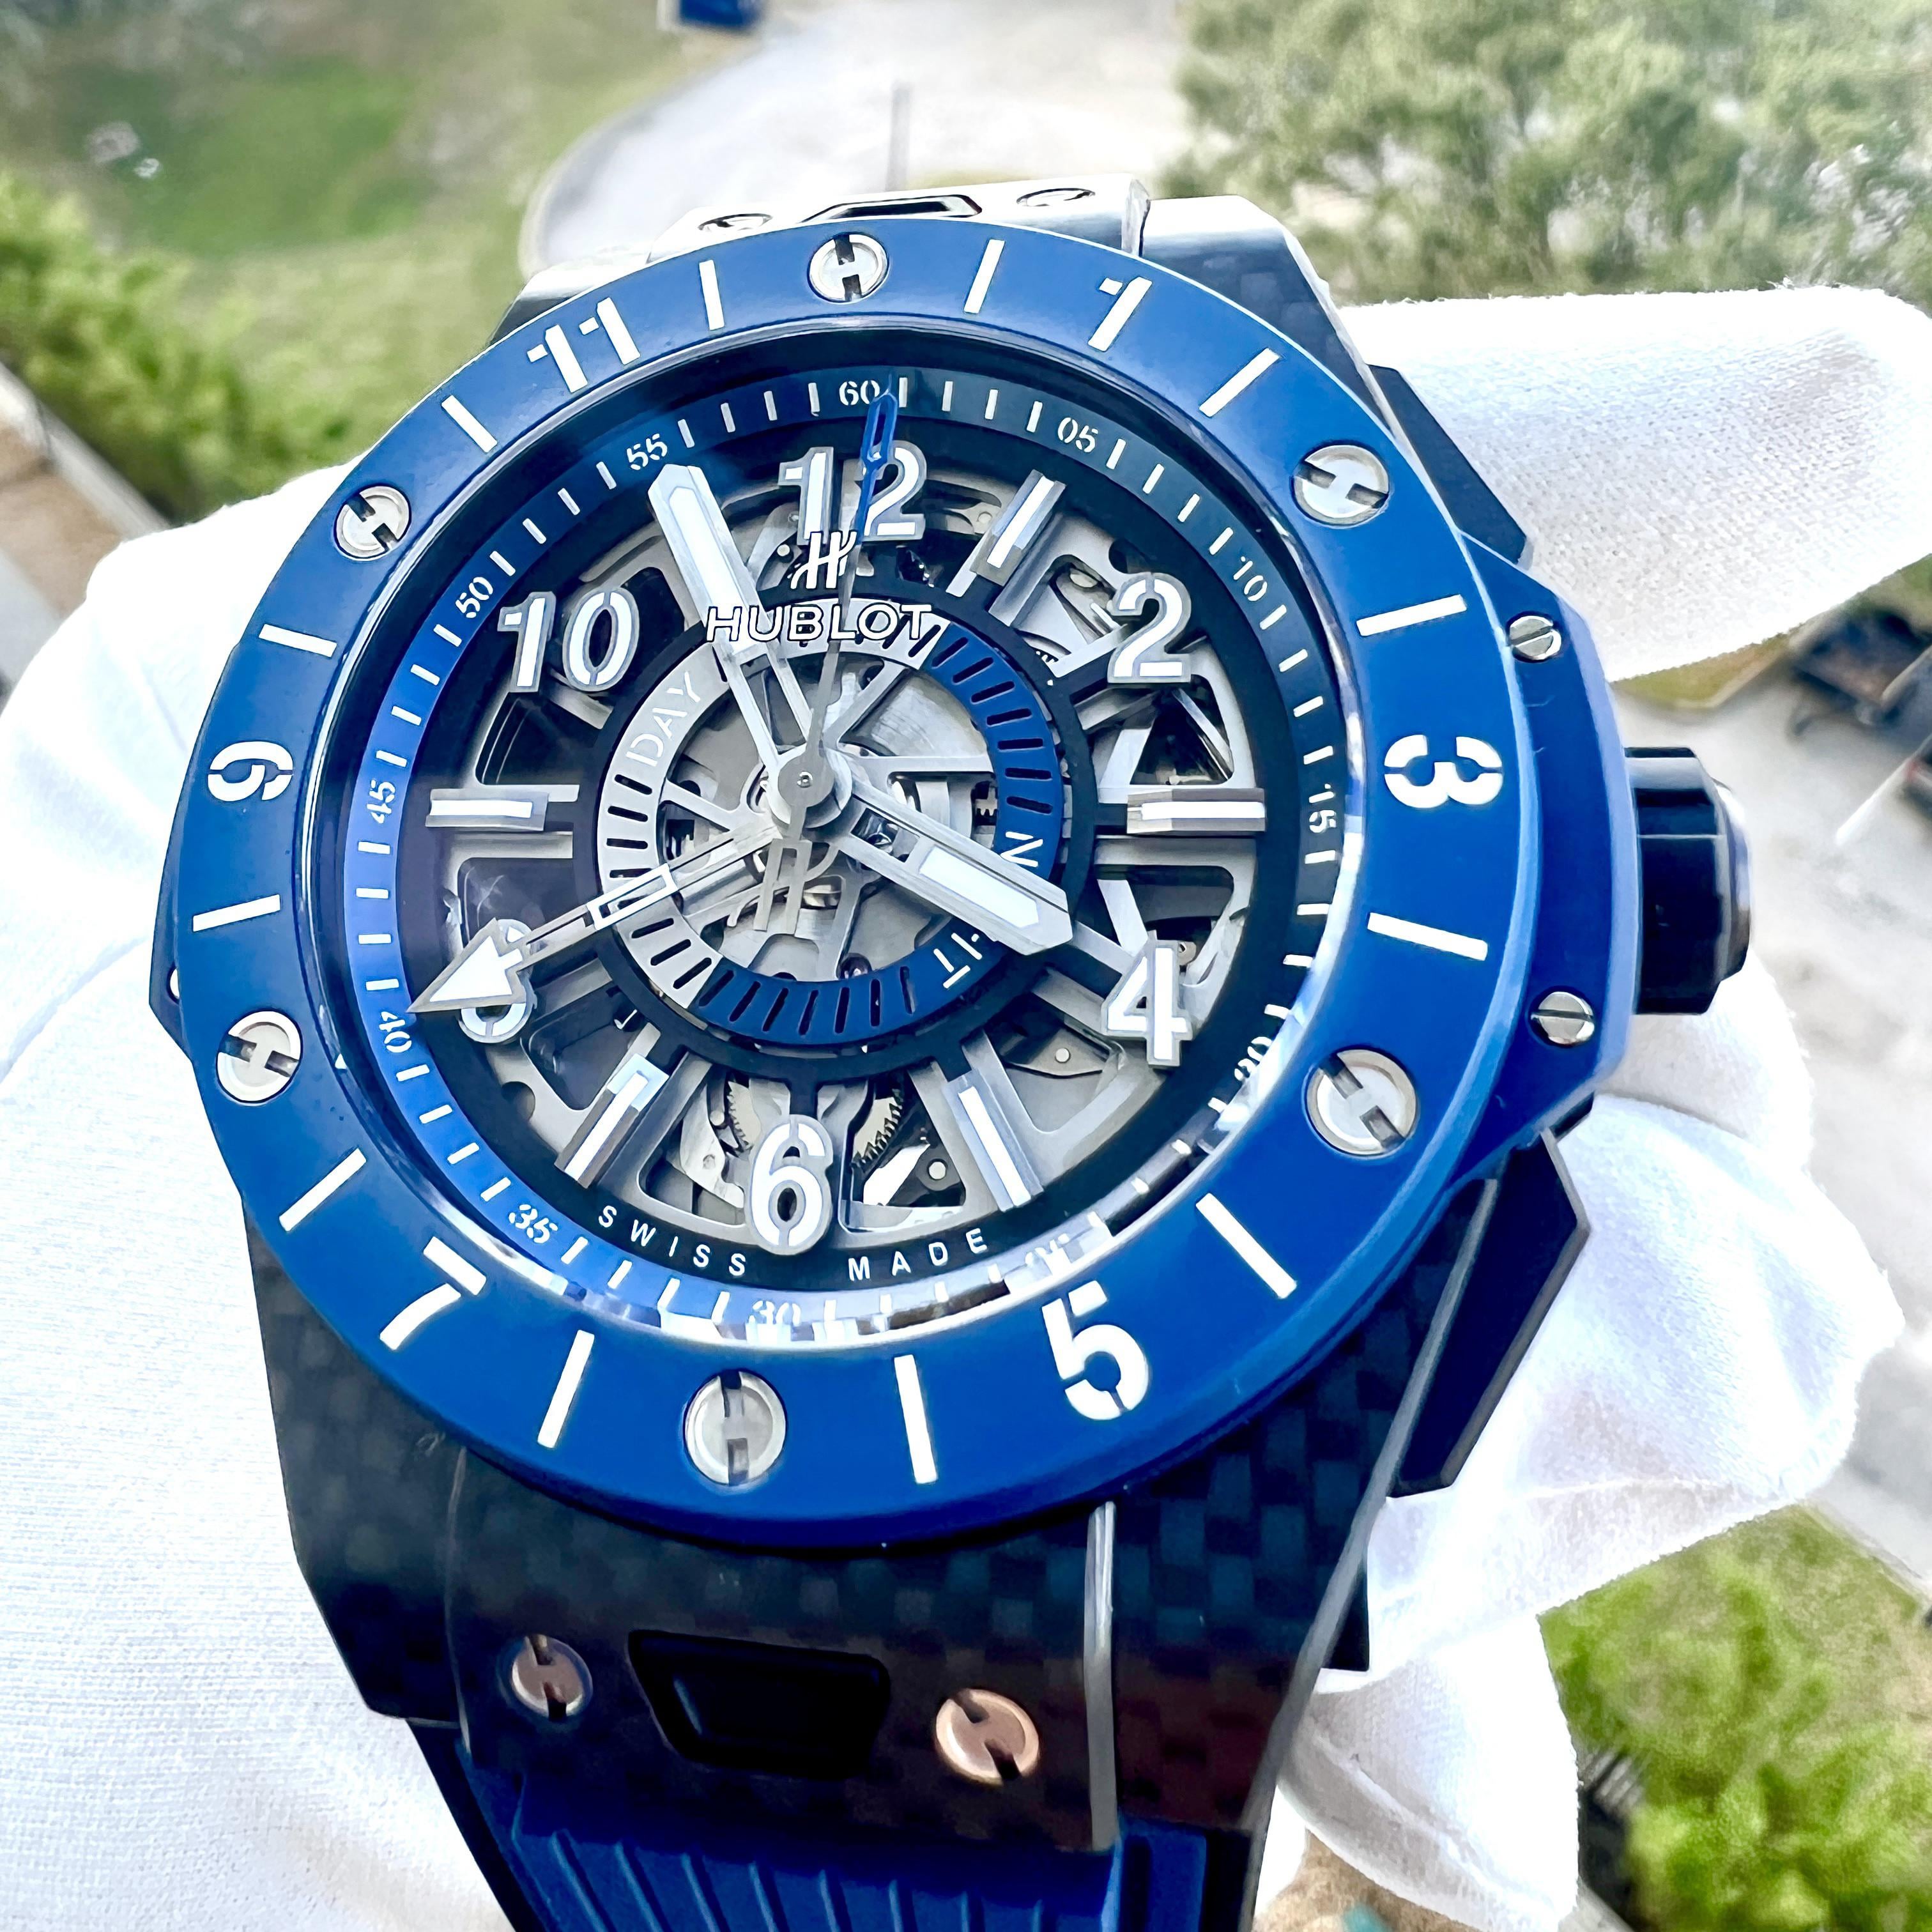 Best Price on all HUBLOT Watches Guaranteed at